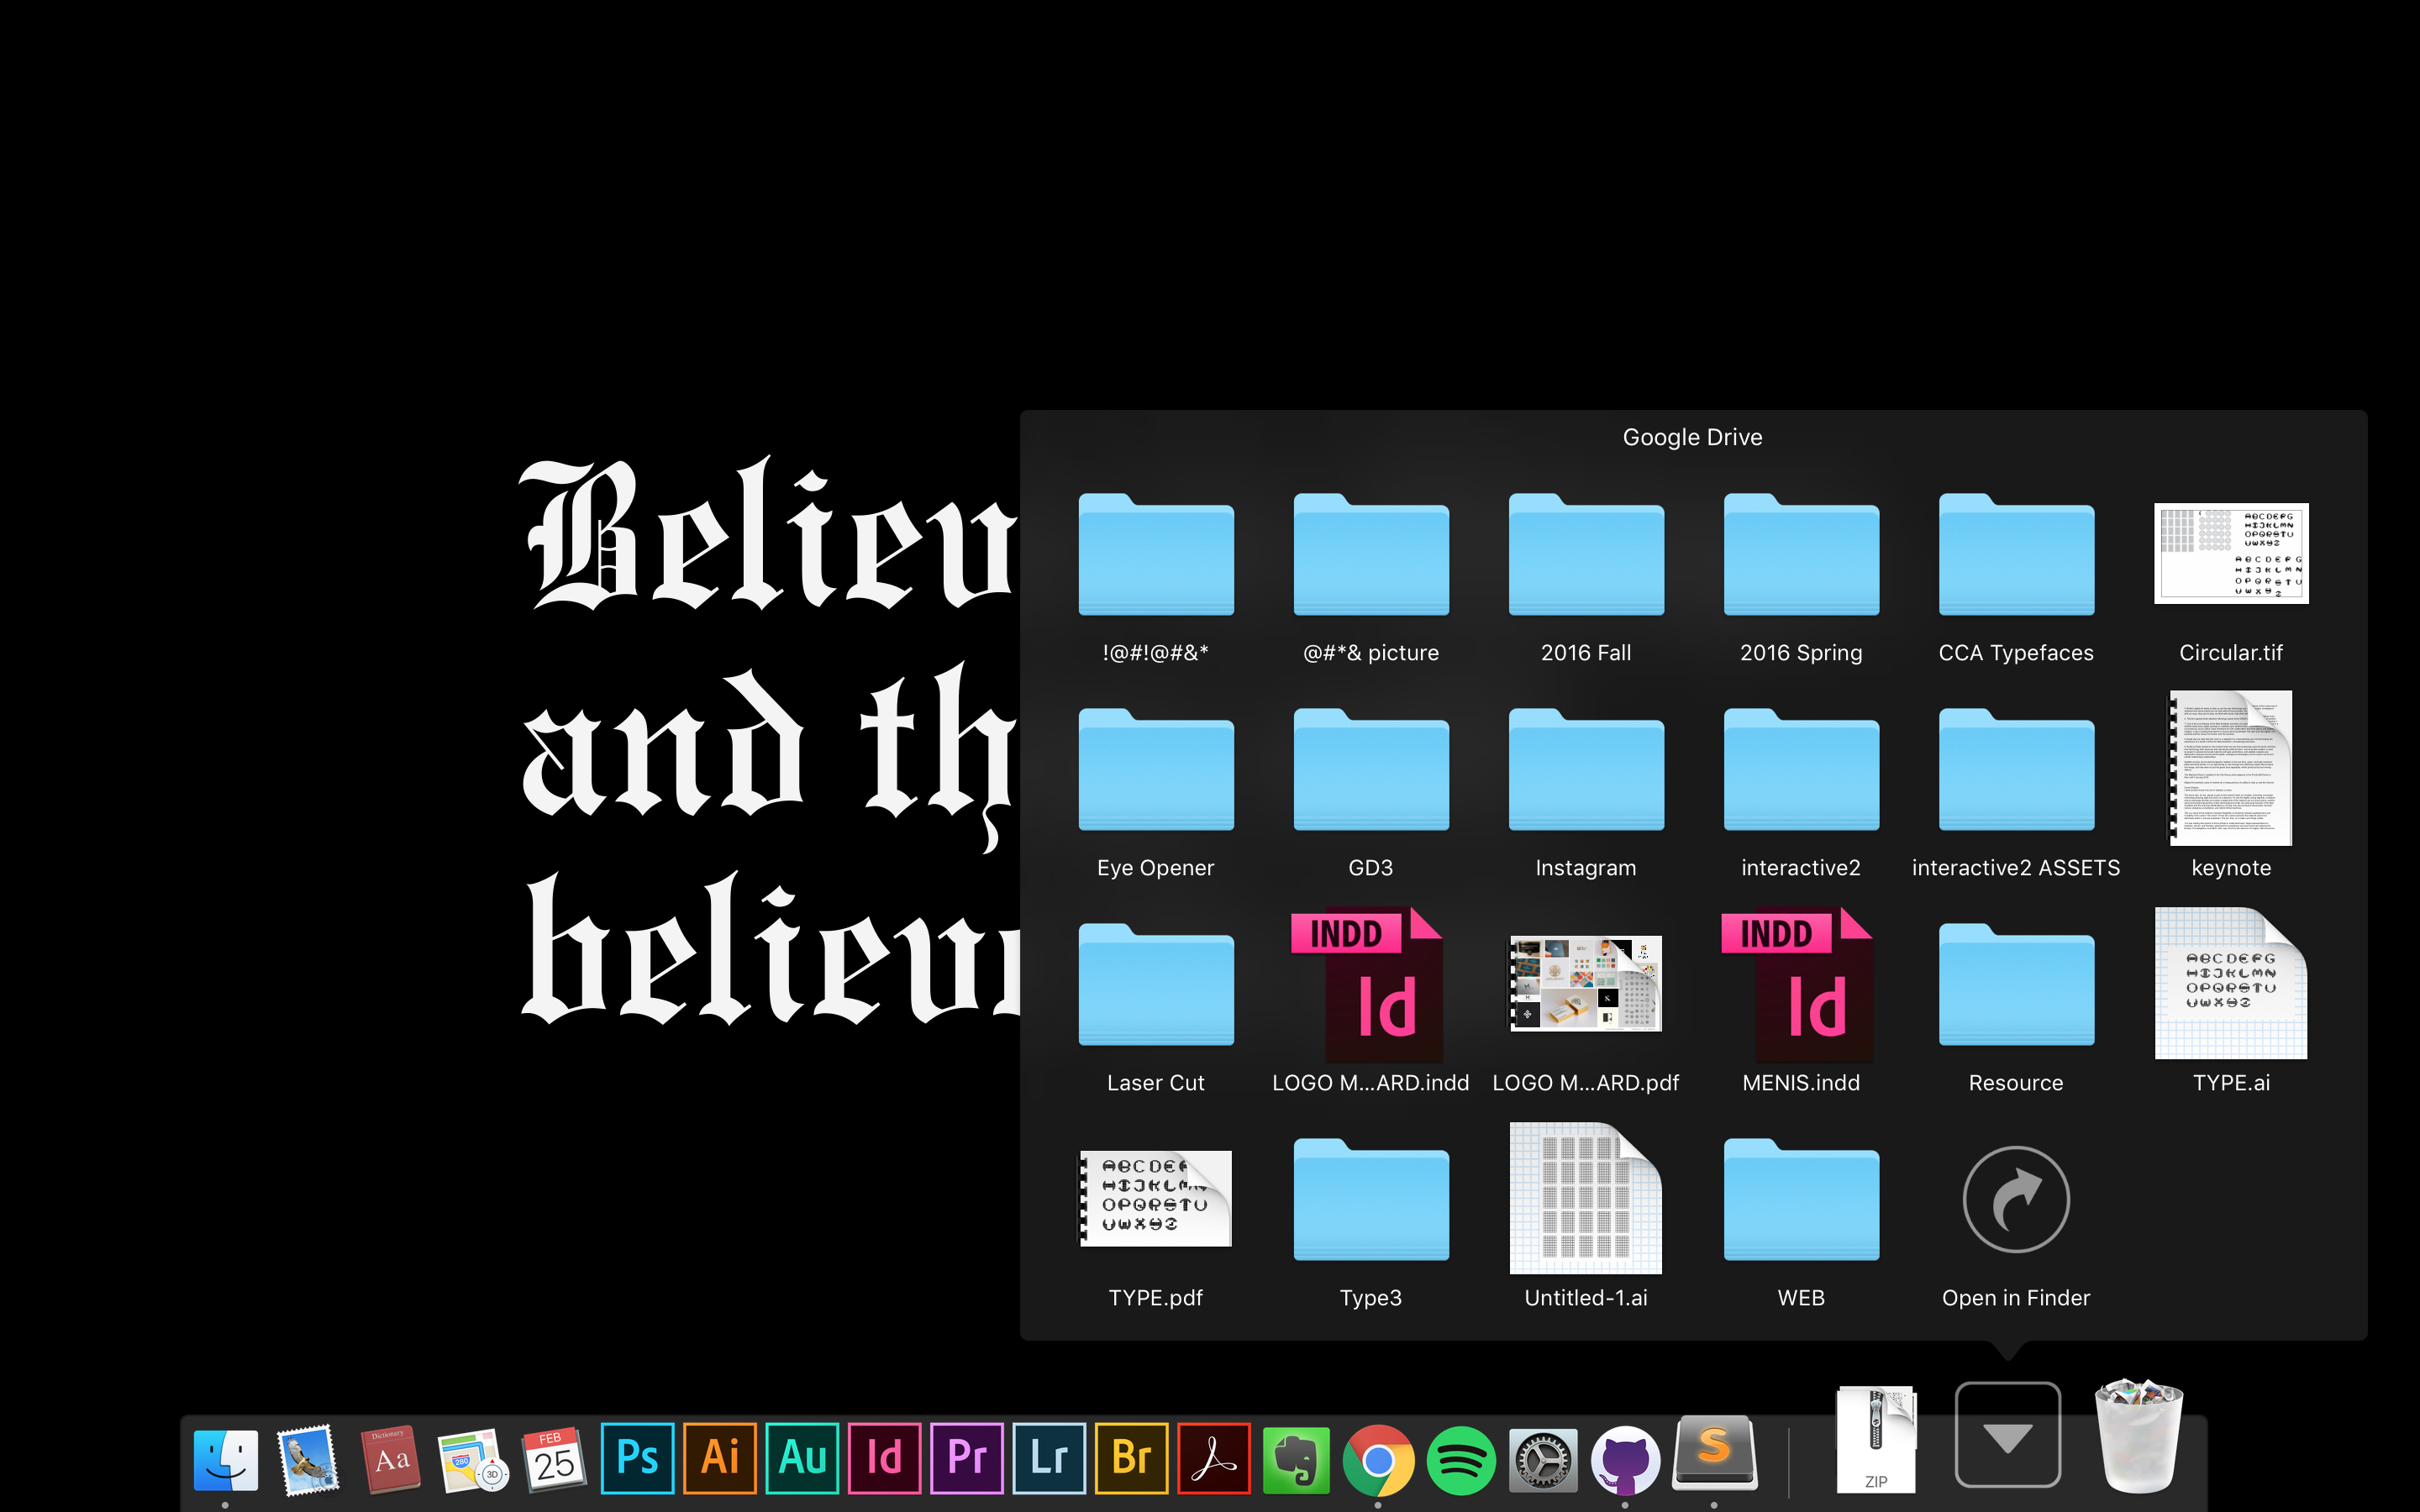 This is what my desktop look like all the time.